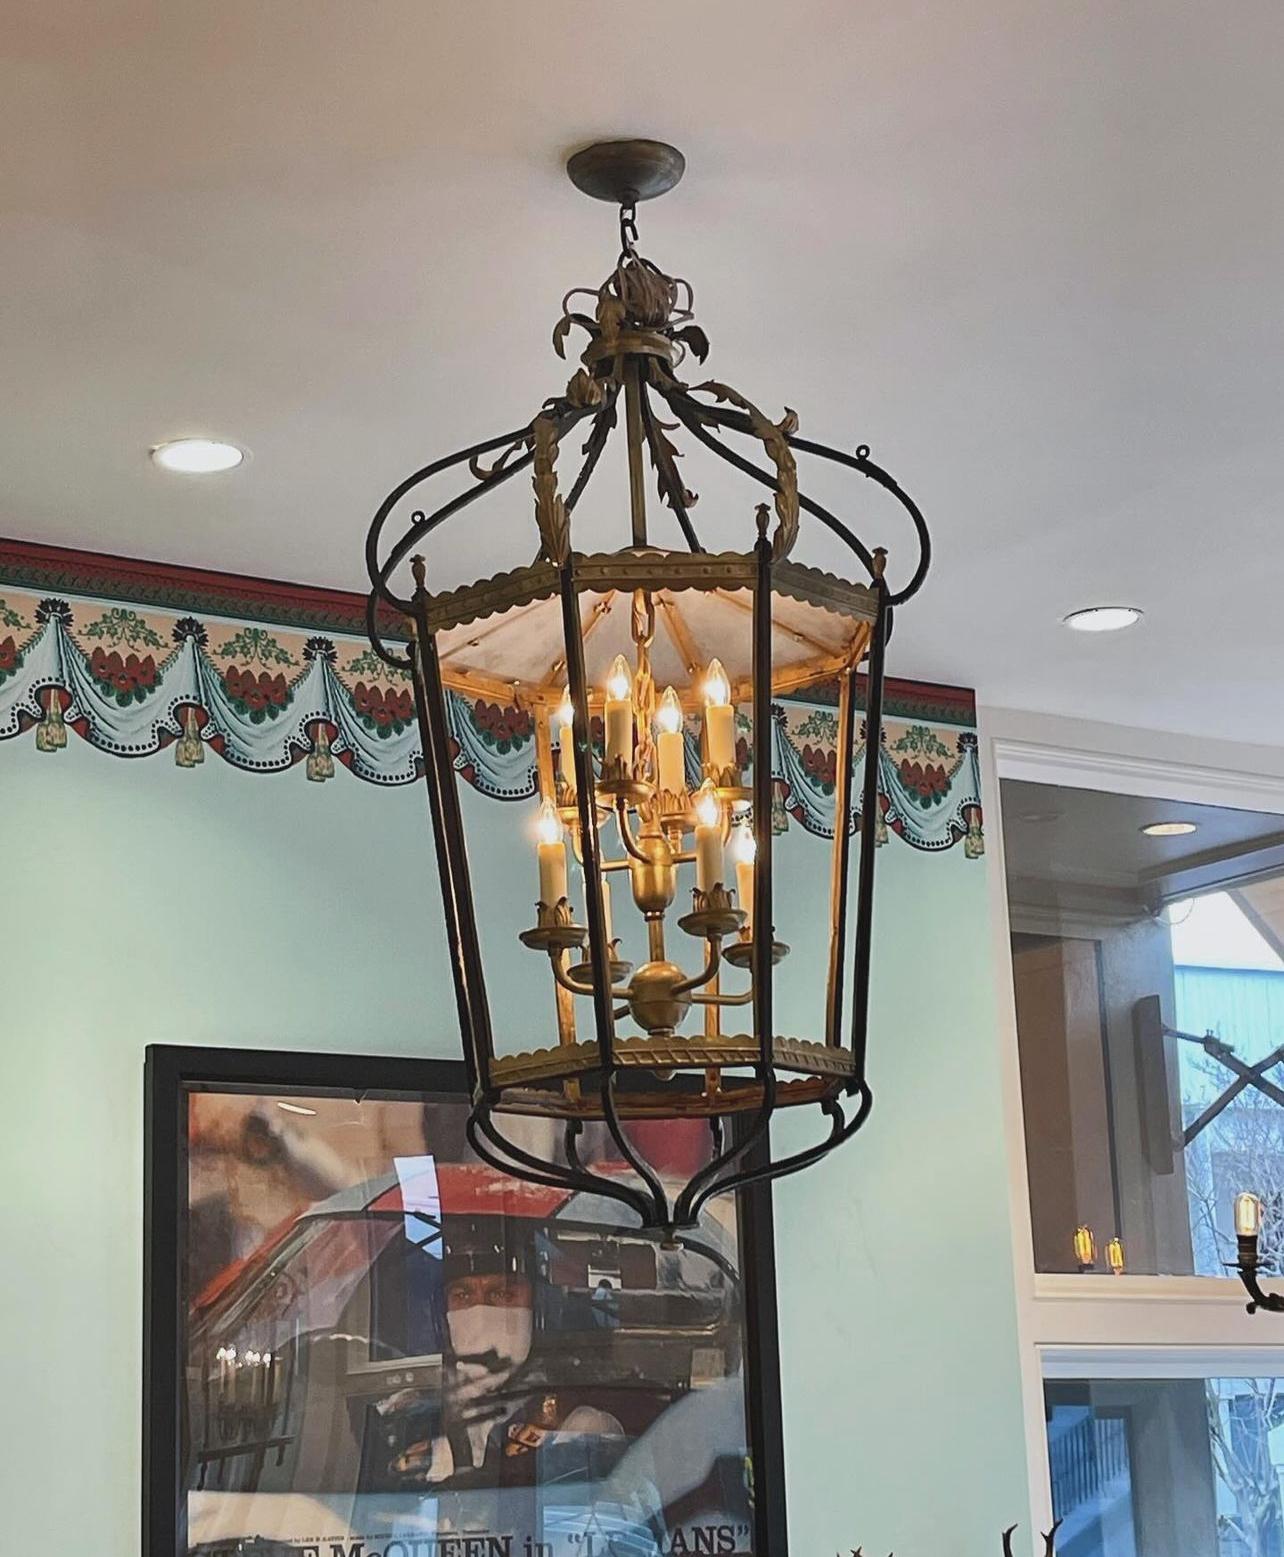 Large scale iron lantern with multiple tier inner light. Glass top. Painted with gold accents